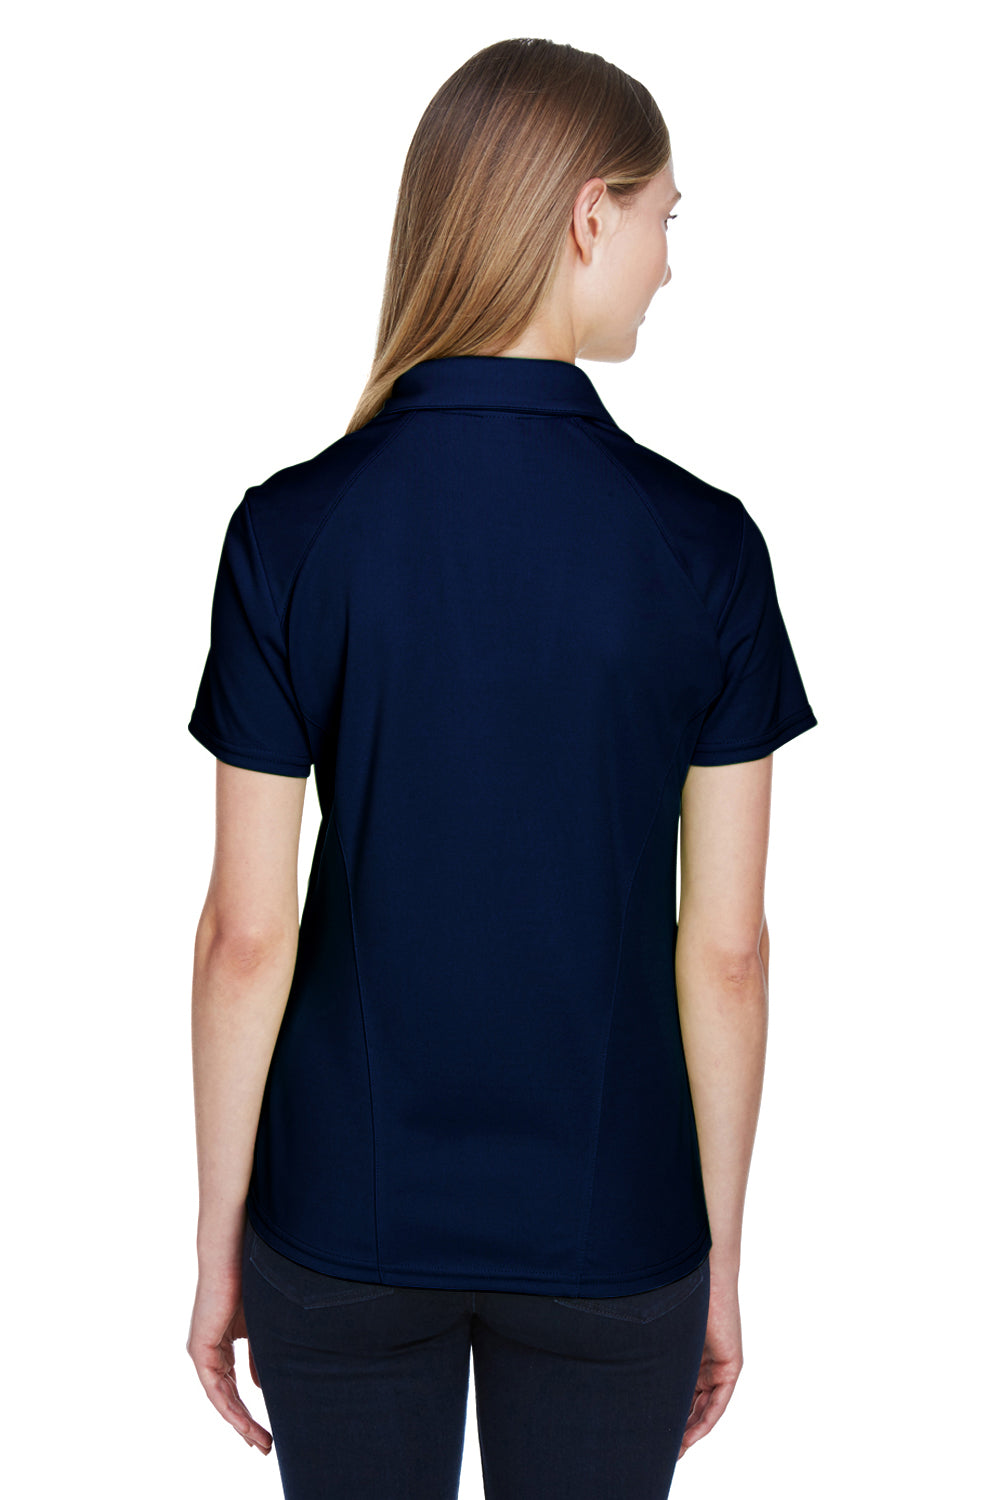 North End 78632 Womens Sport Red Performance Moisture Wicking Short Sleeve Polo Shirt Navy Blue Back